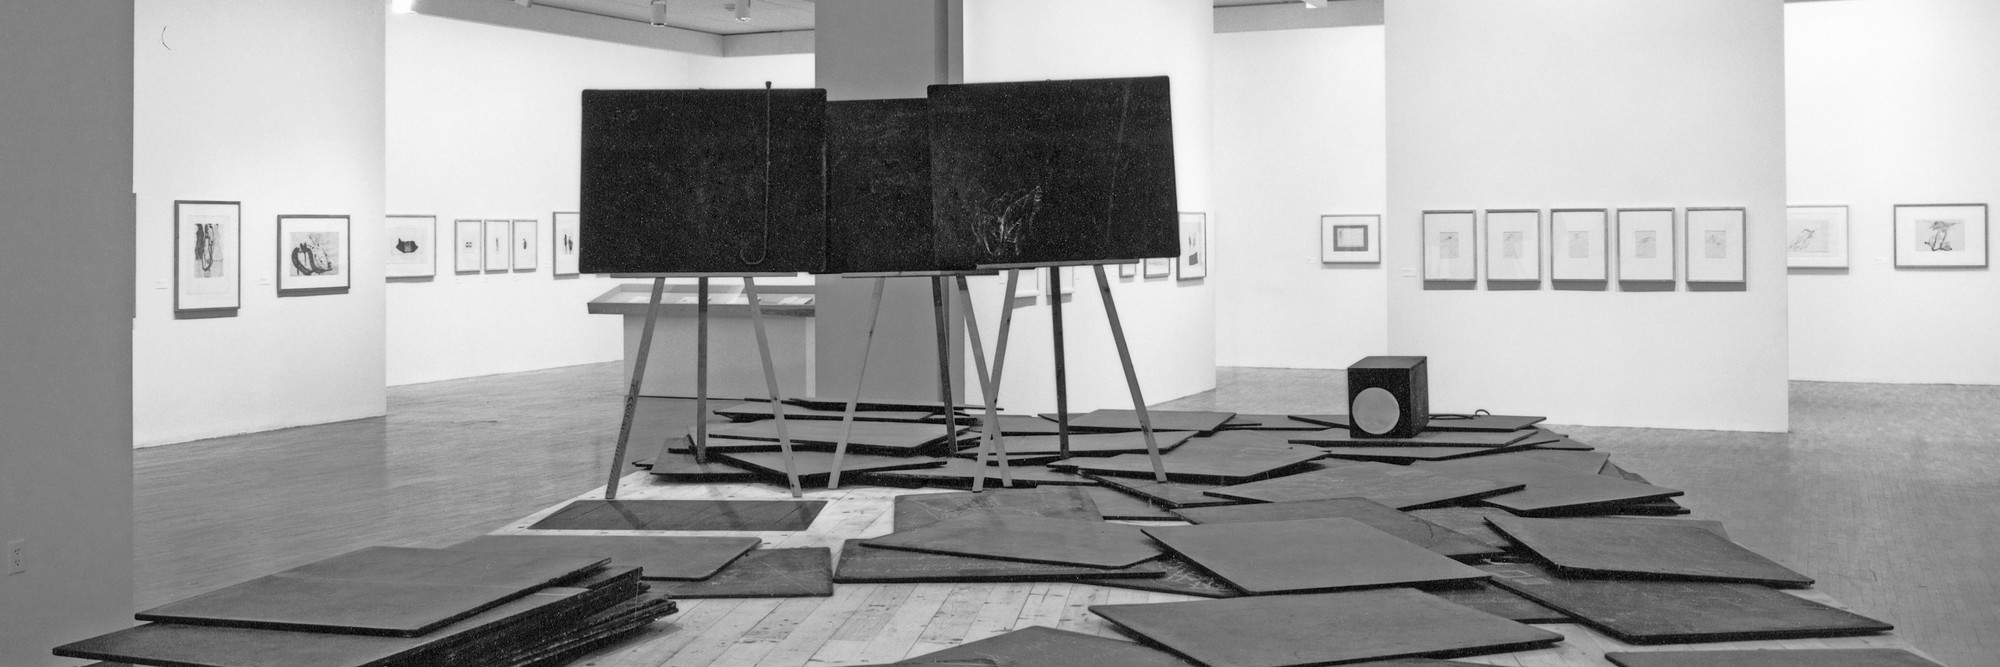 Installation view of Thinking Is Form: The Drawings of Joseph Beuys at The Museum of Modern Art, New York. Photo: Mali Olatunji